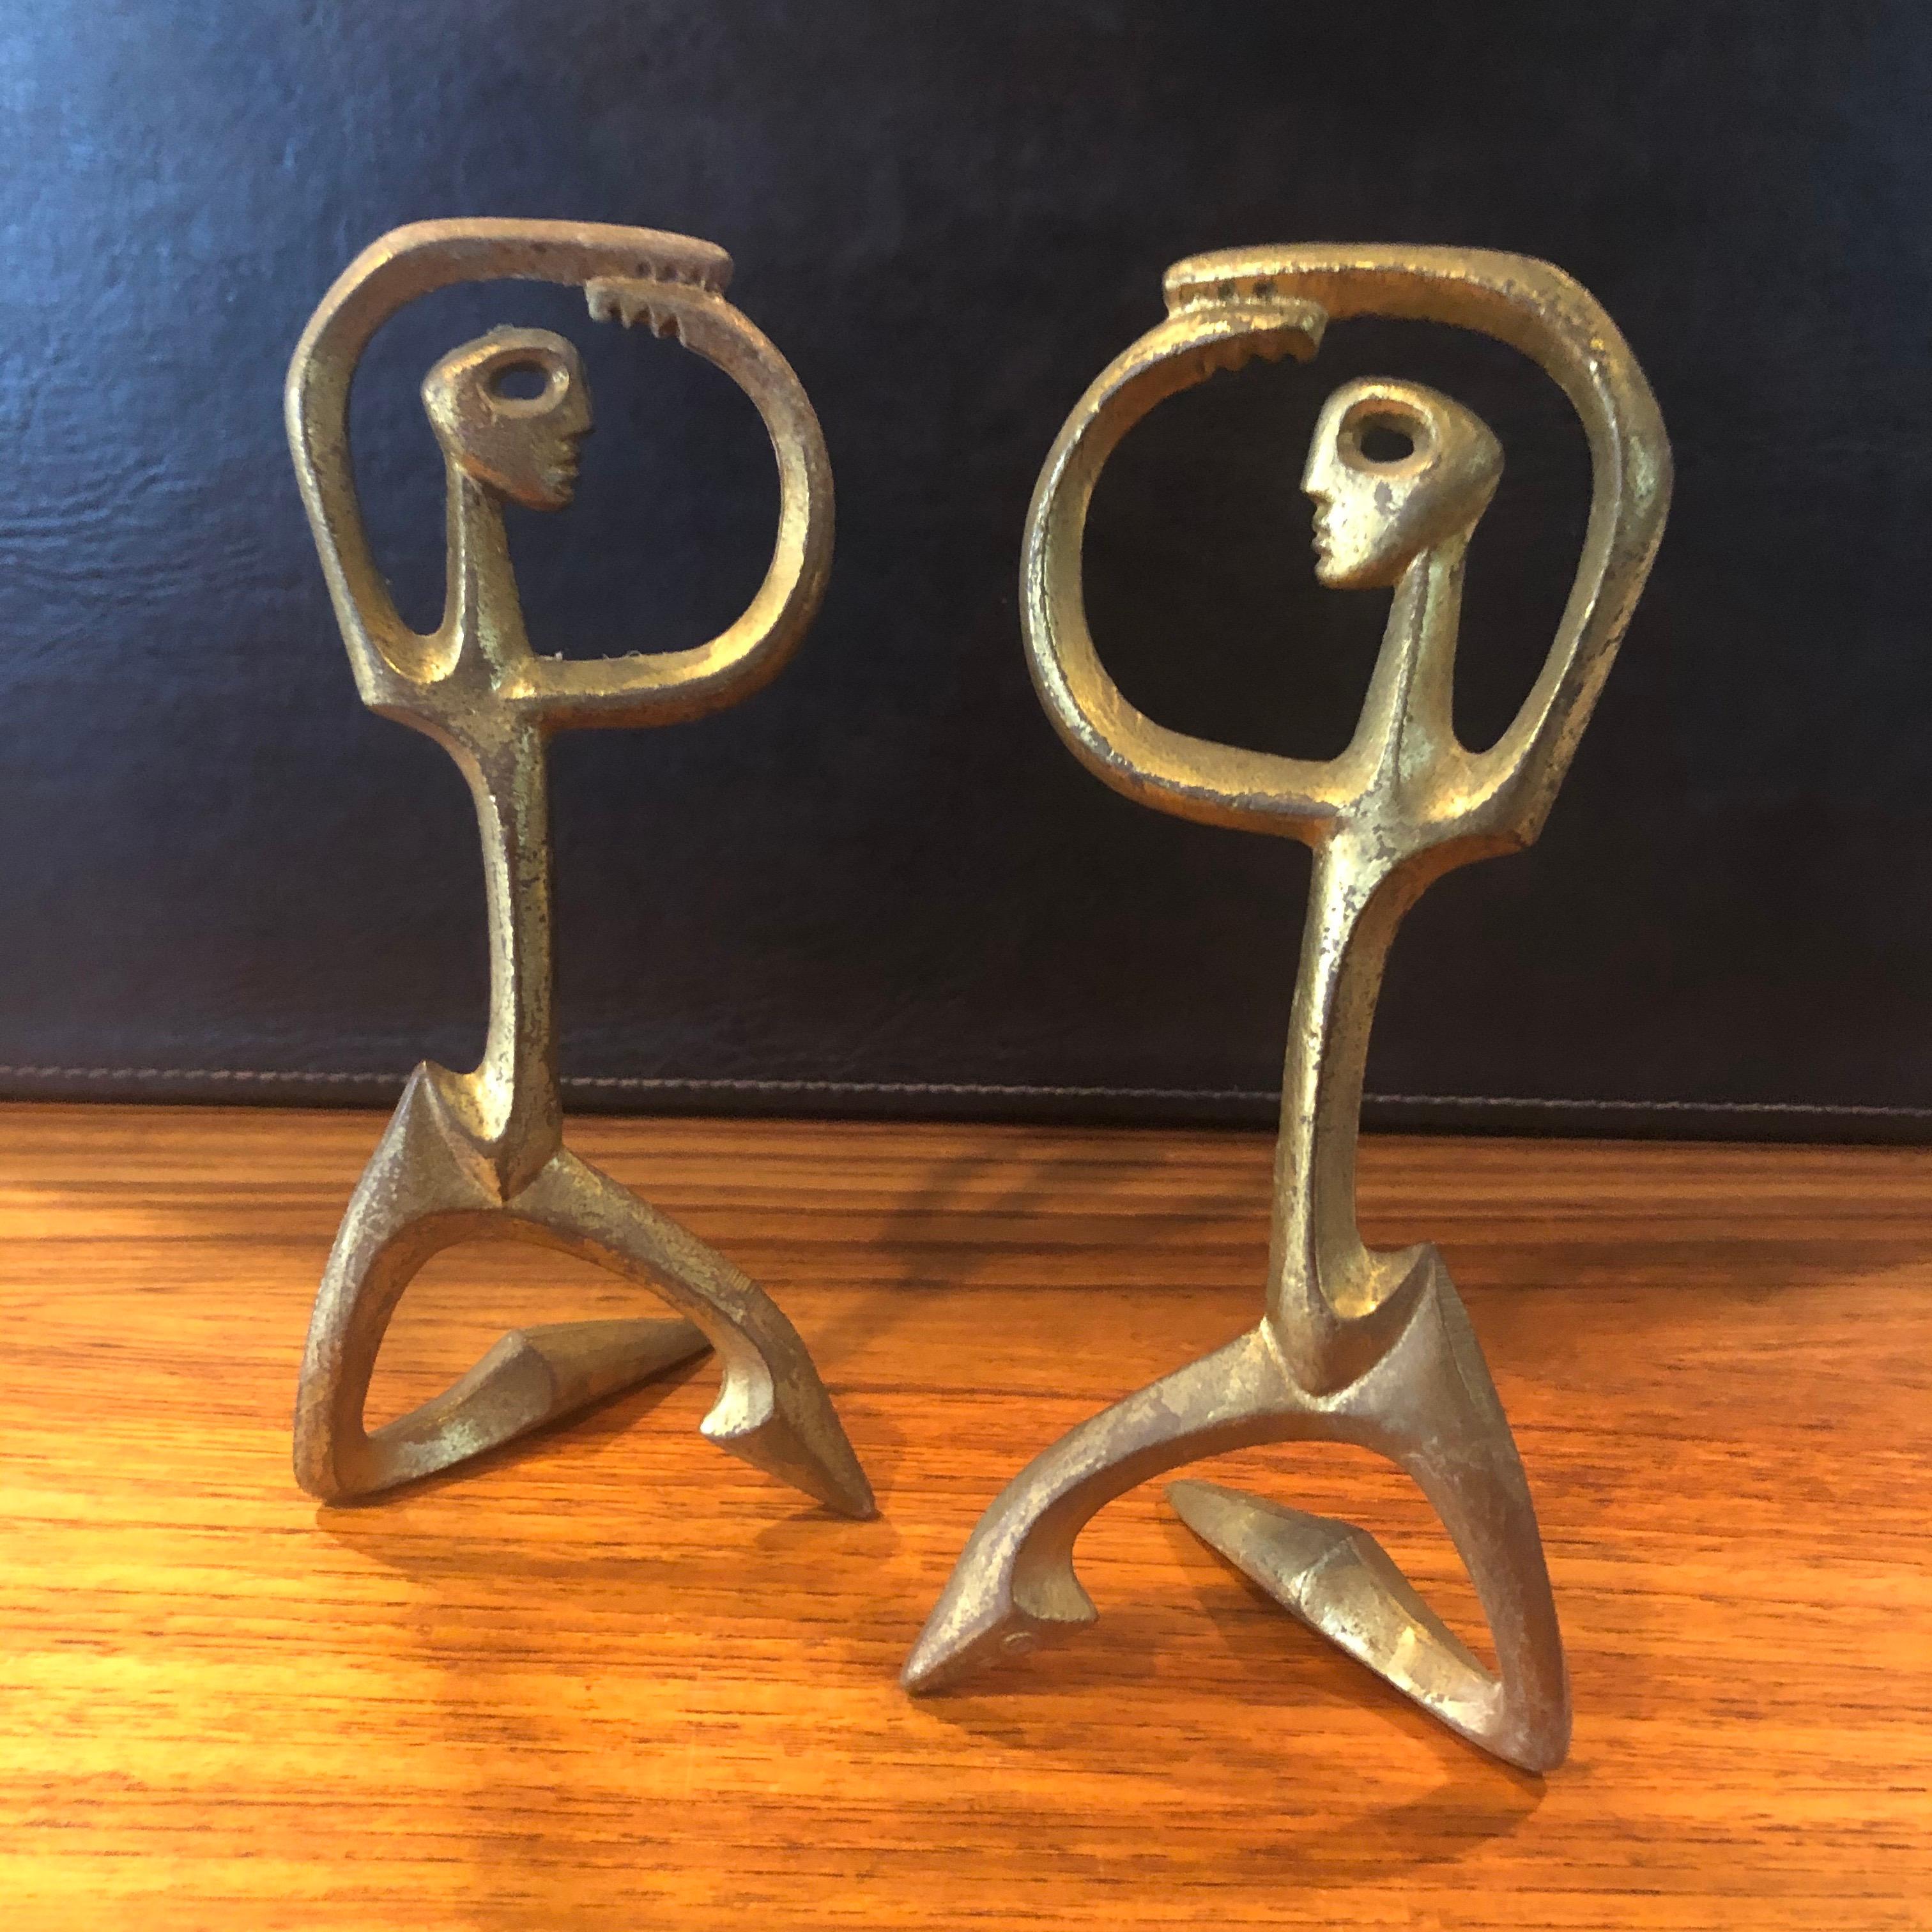 Pair of simple and elegant figurative patinated bronze sculptures by Frederic Weinberg, circa 1950s. The Minimalist and modern complementing figures have a wonderful vintage patina and are signed 